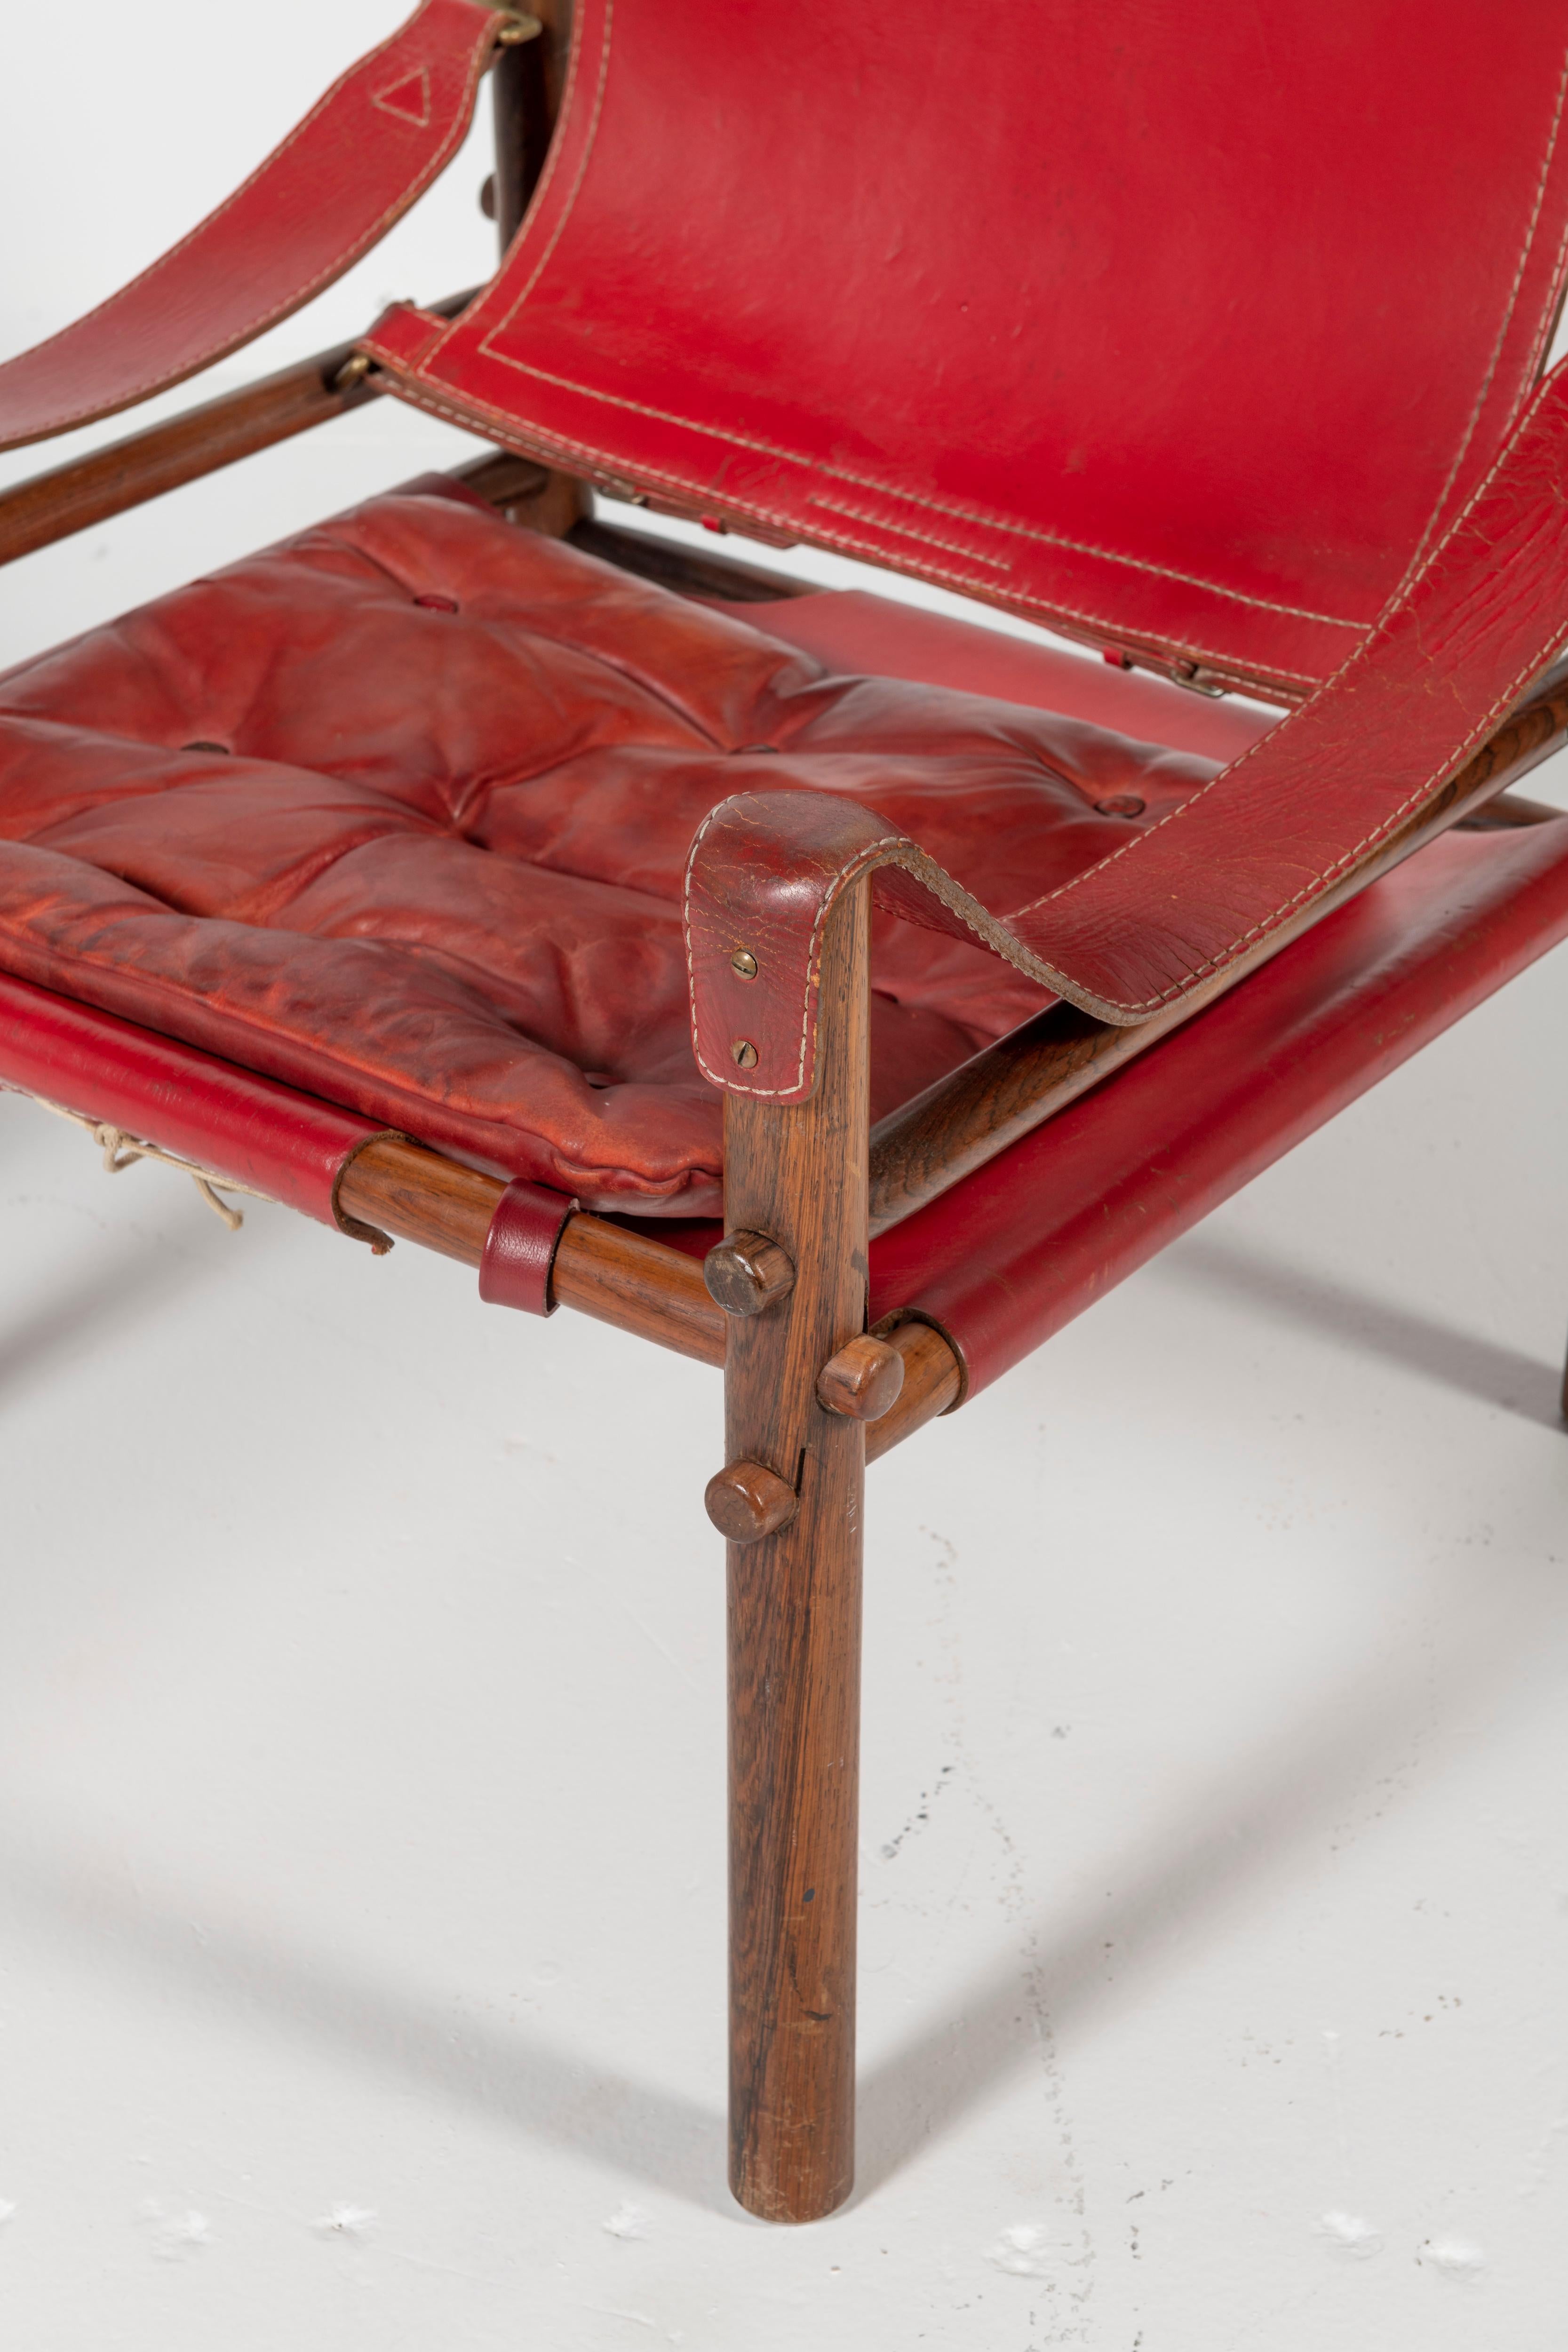 Pair of safari chairs, Sirocco model in good condition with original red leather.
Designed by Arne Norell, produced by Arne Norell AB in Aneby, Sweden, 1960s.